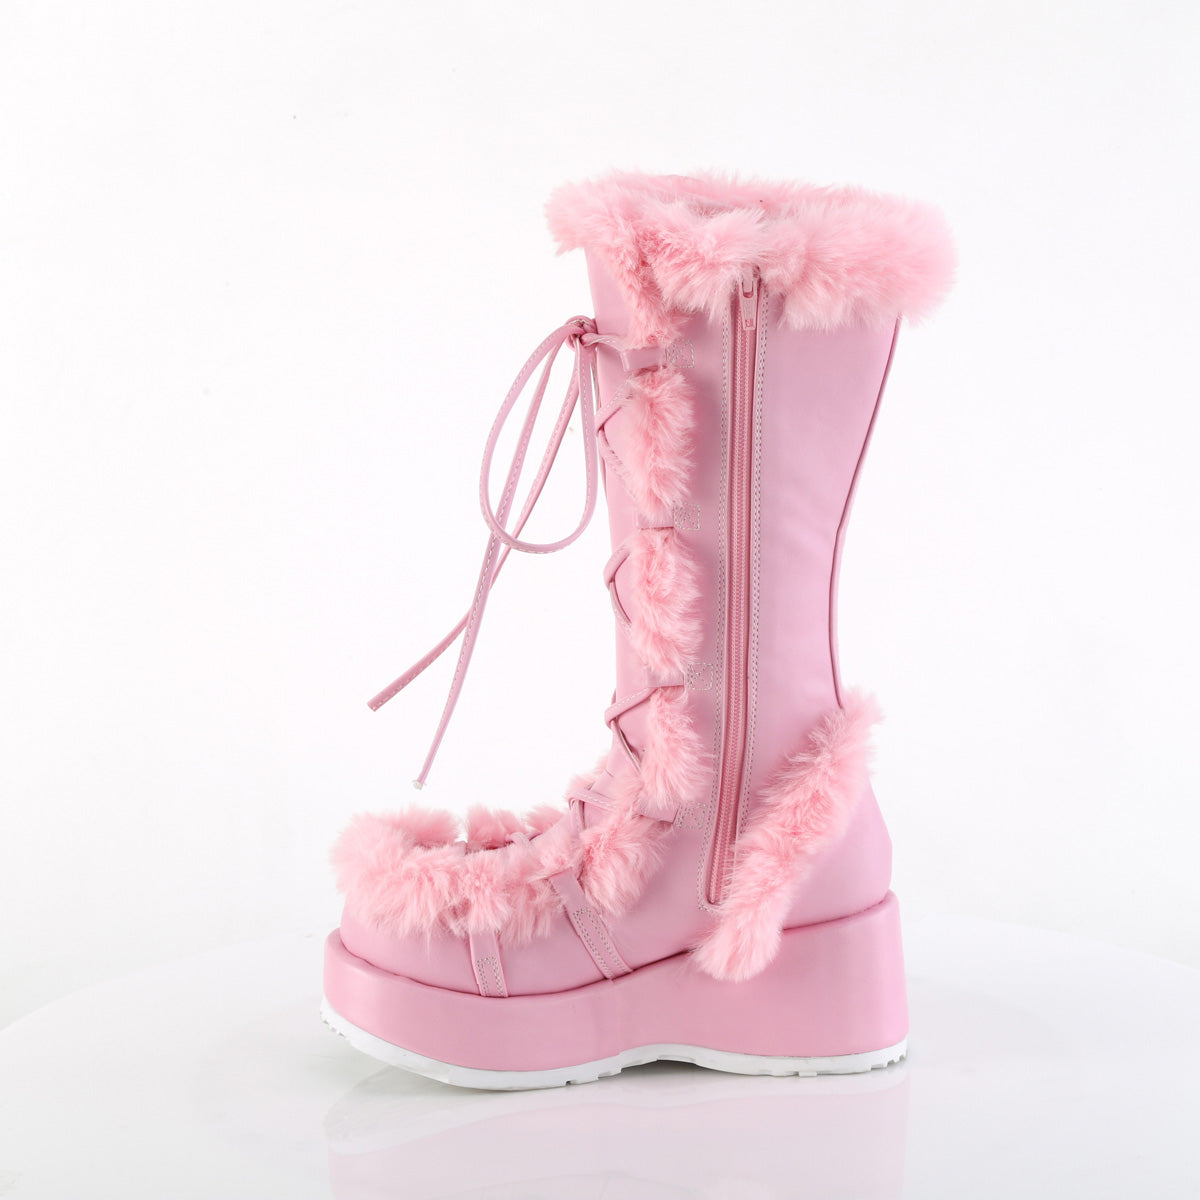 Cubby Love boots